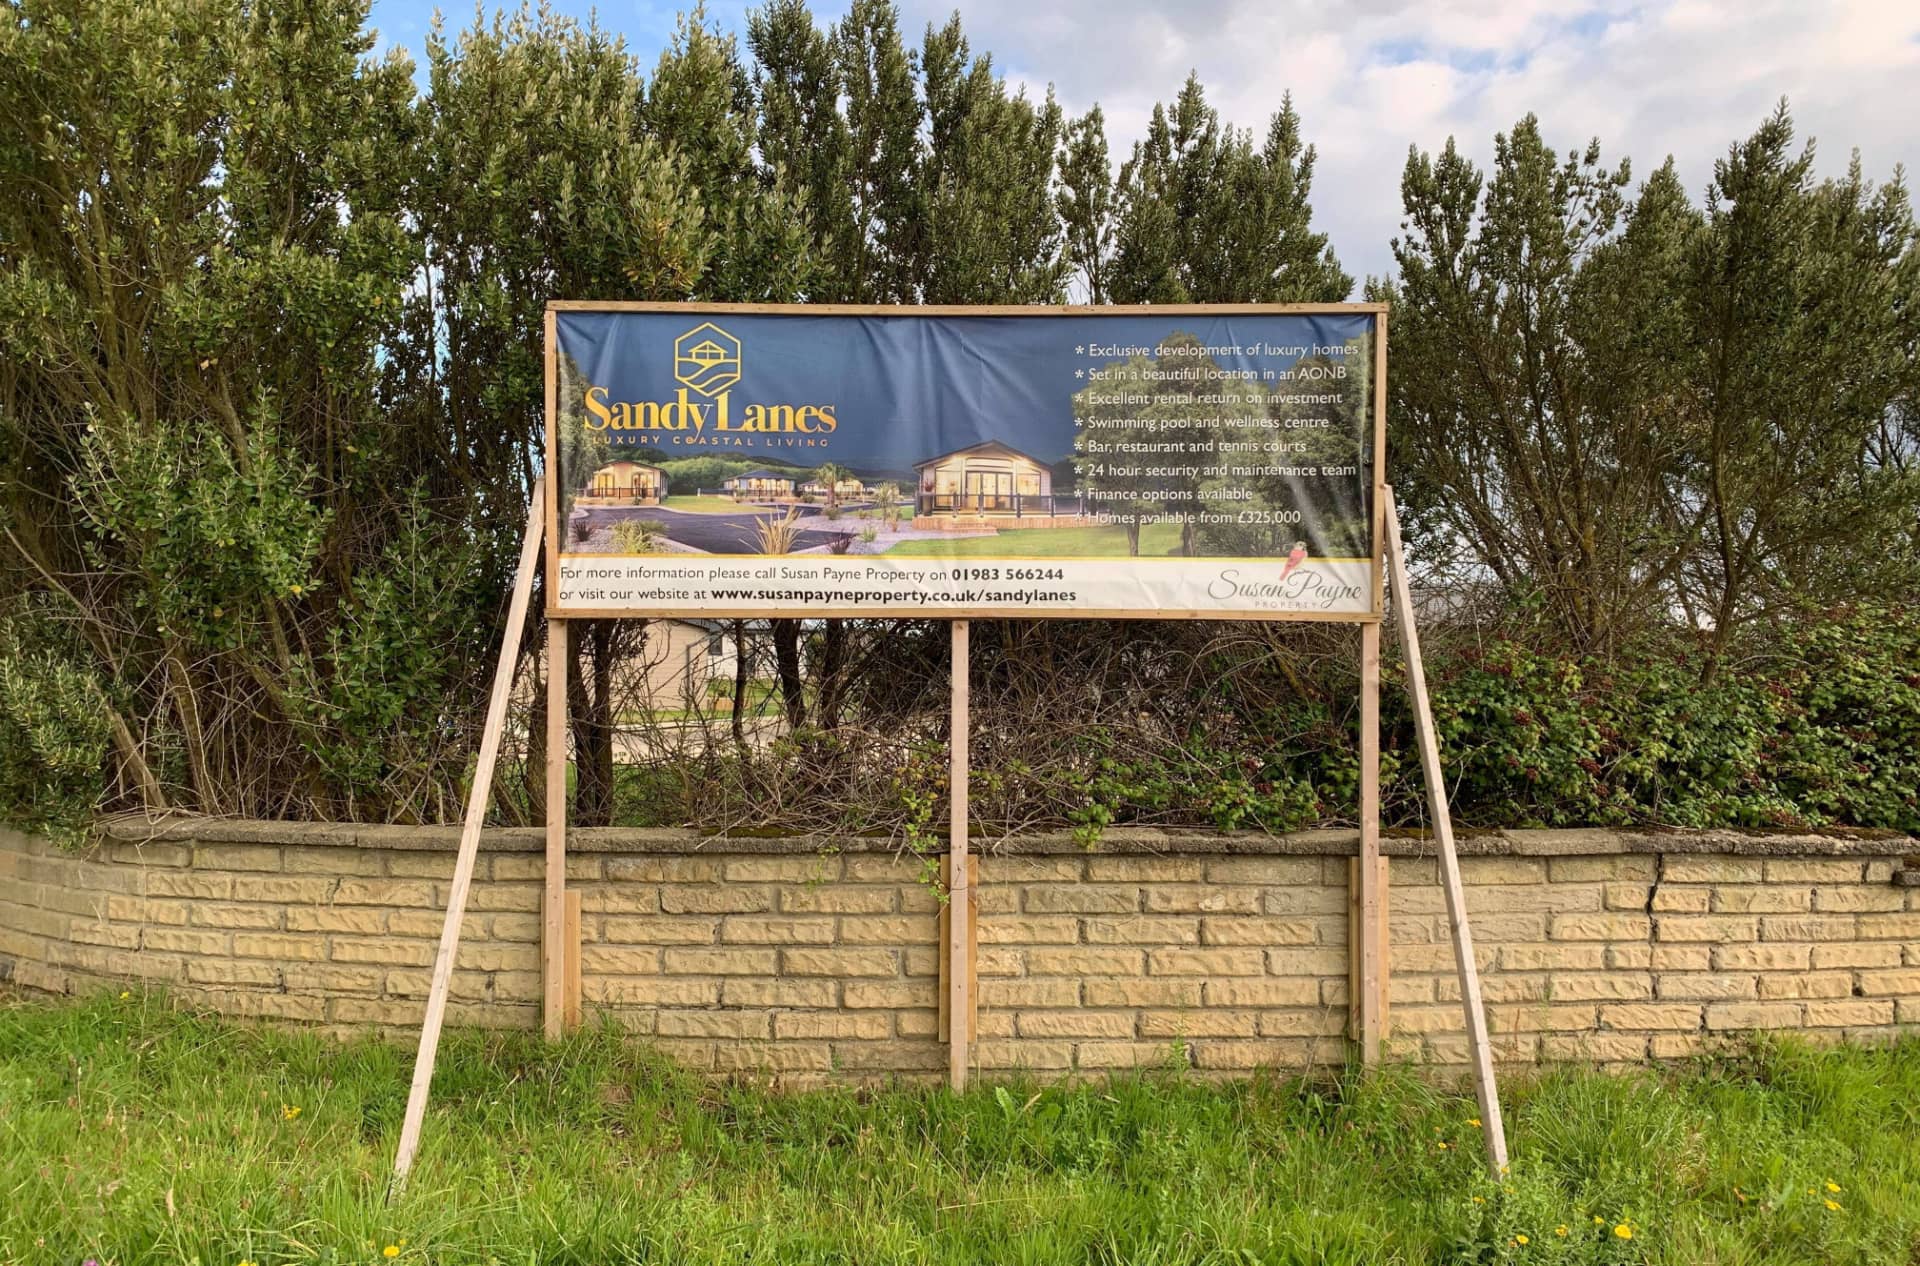 Sandy Lanes advertising board by former Atherfield Holiday Camp